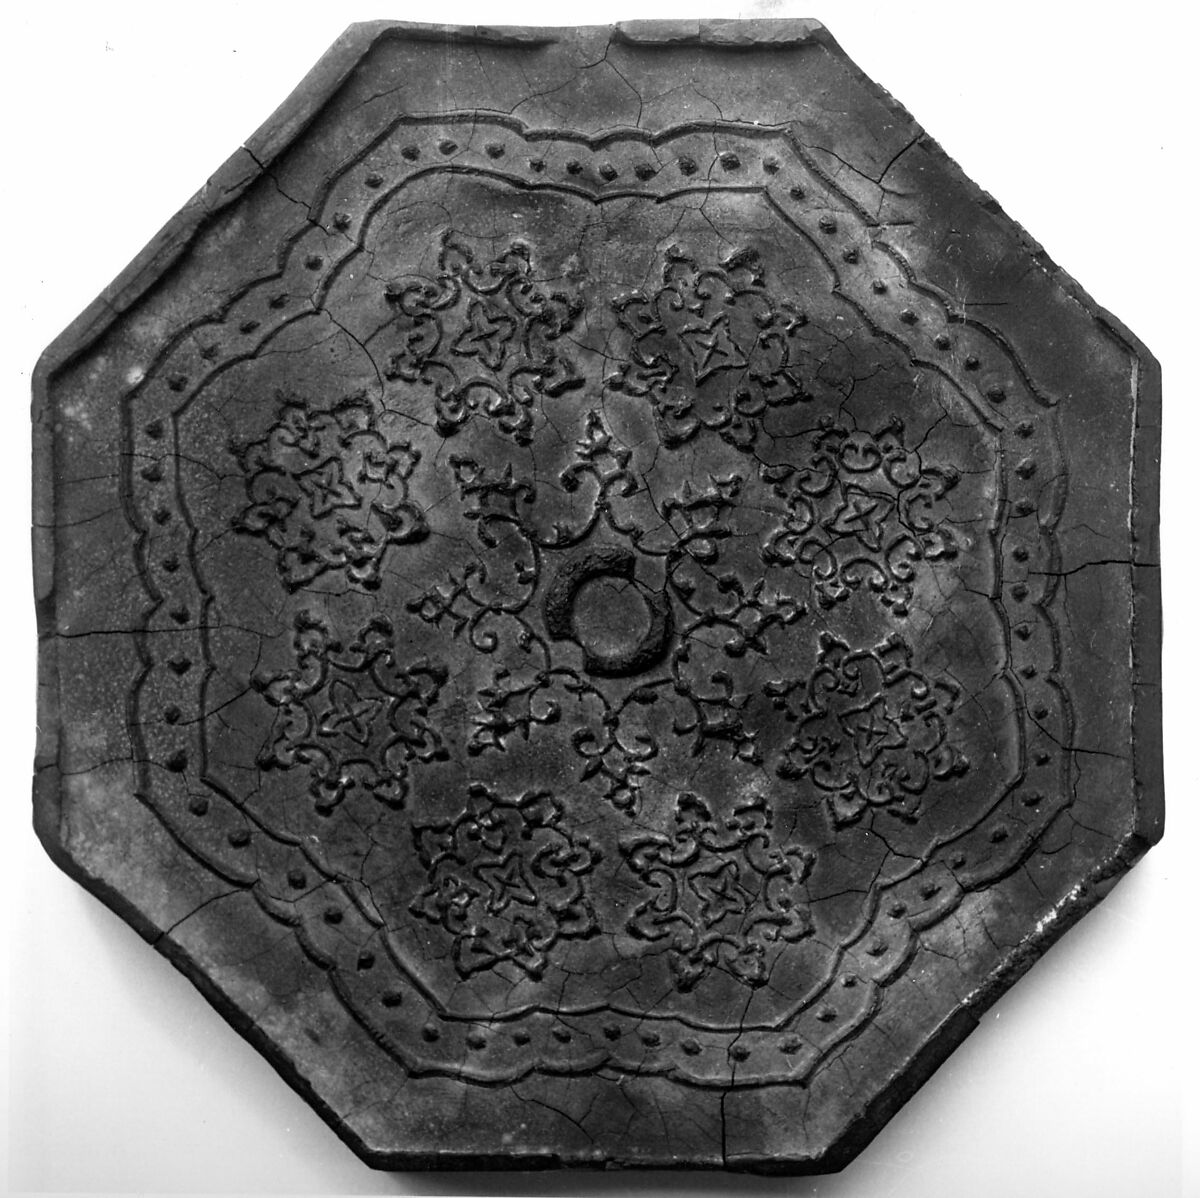 Ink Tablet with Tang Mirror Design, Black ink, China 